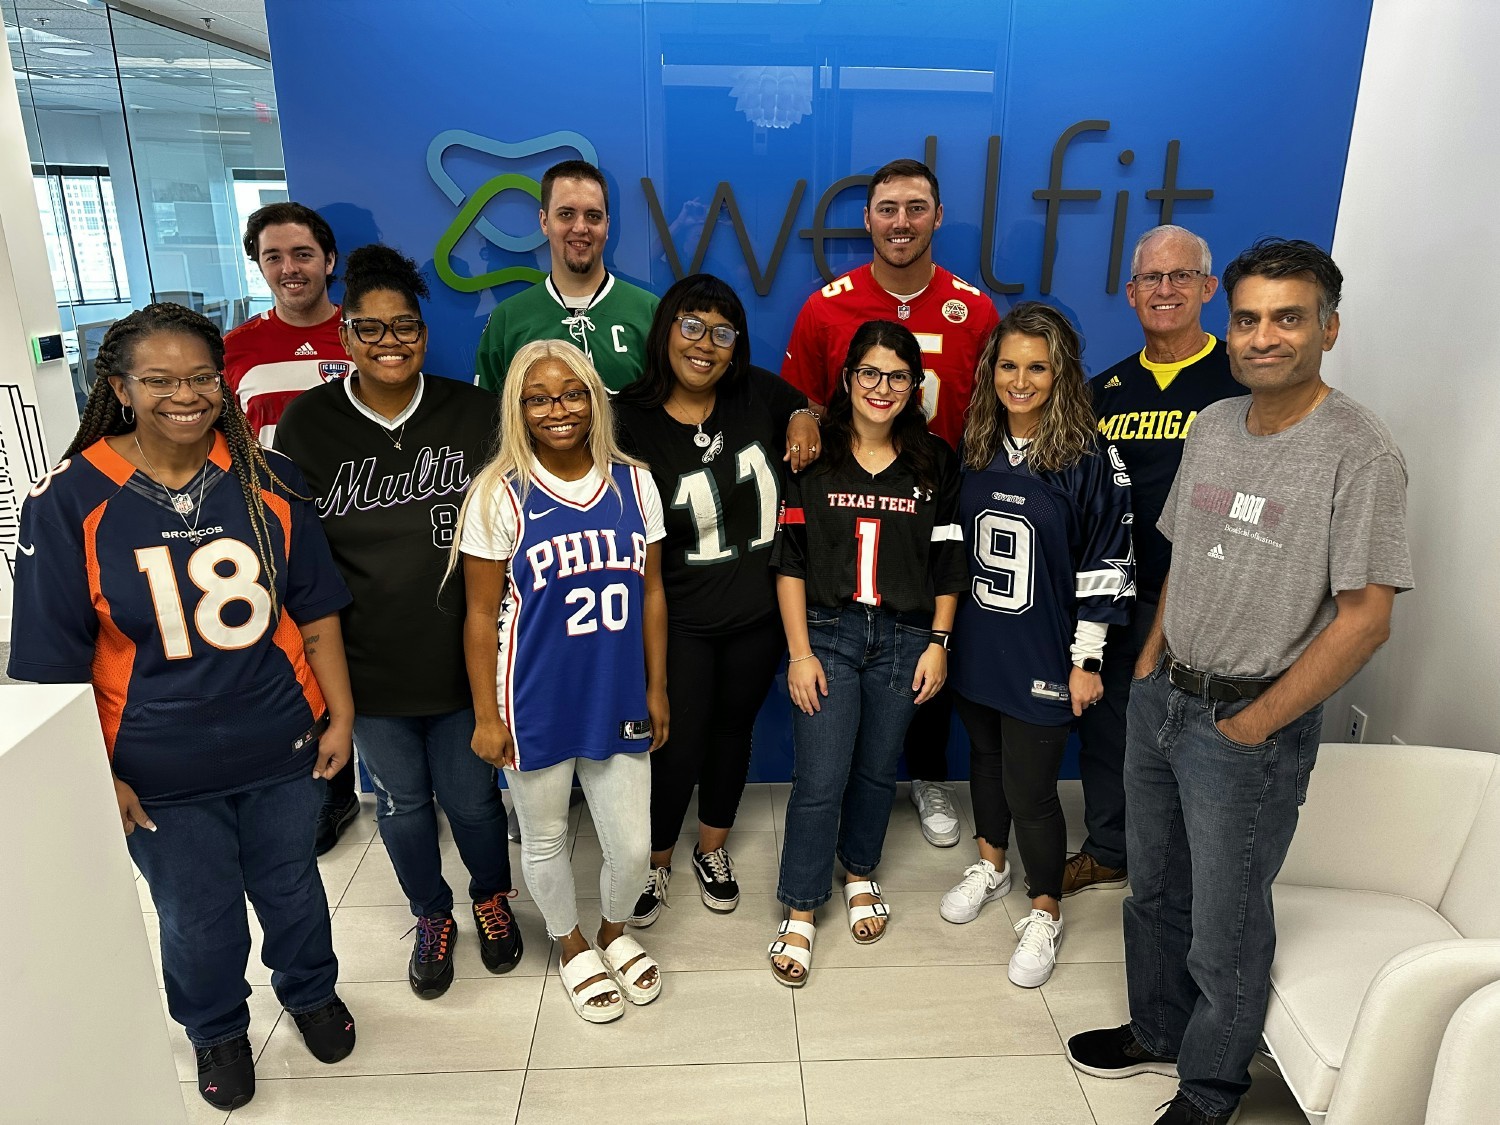 Customer Service Week becomes a celebration of our undefeated customer service team.